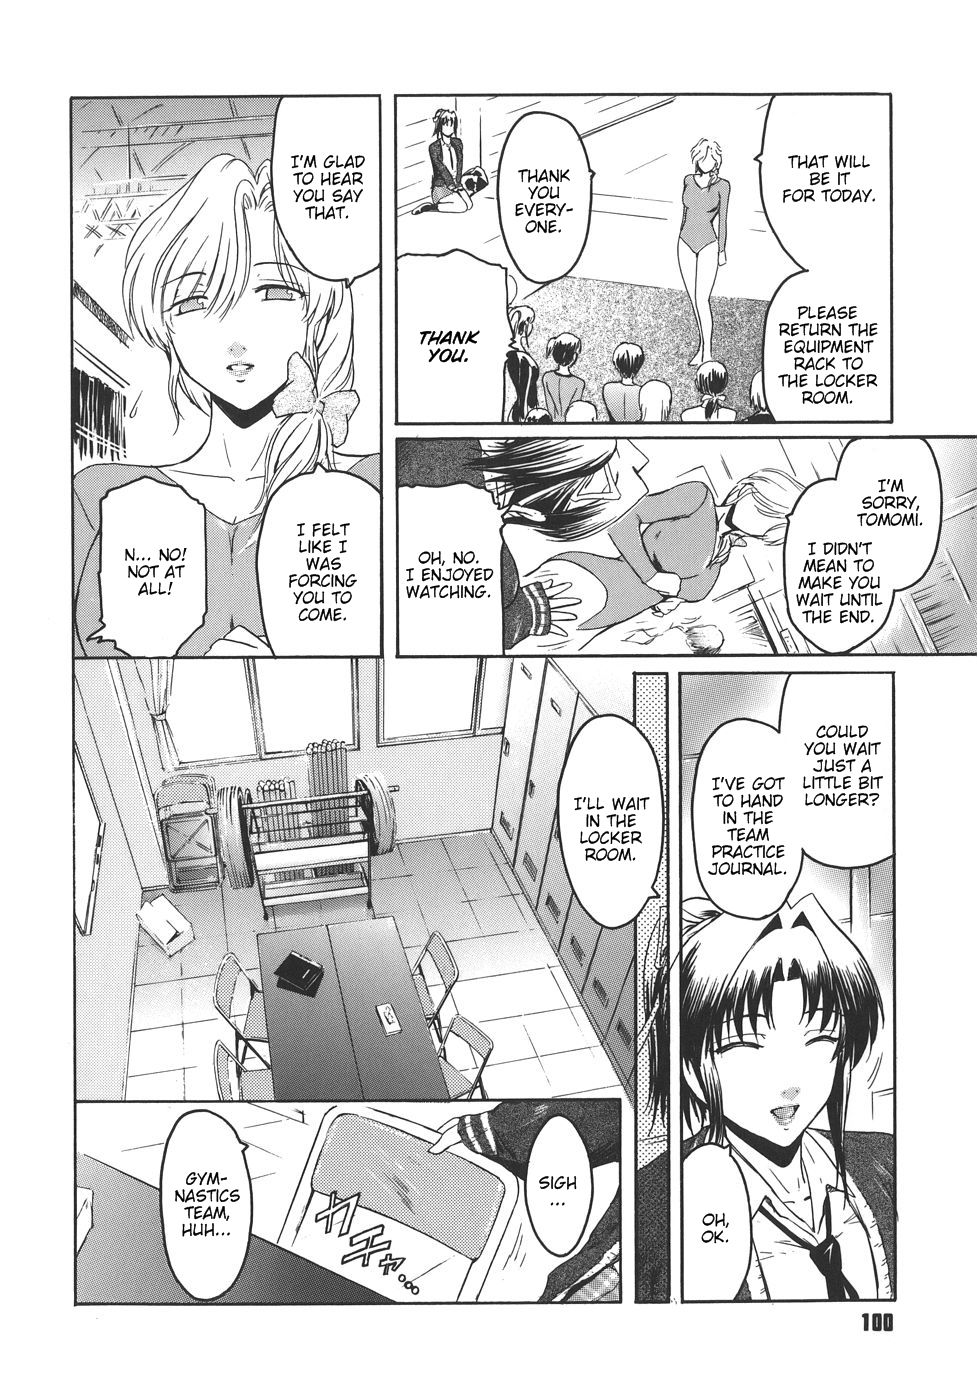 Hentai Manga Comic-Virgin-Chapter 5 - to might be for tomodachi-2